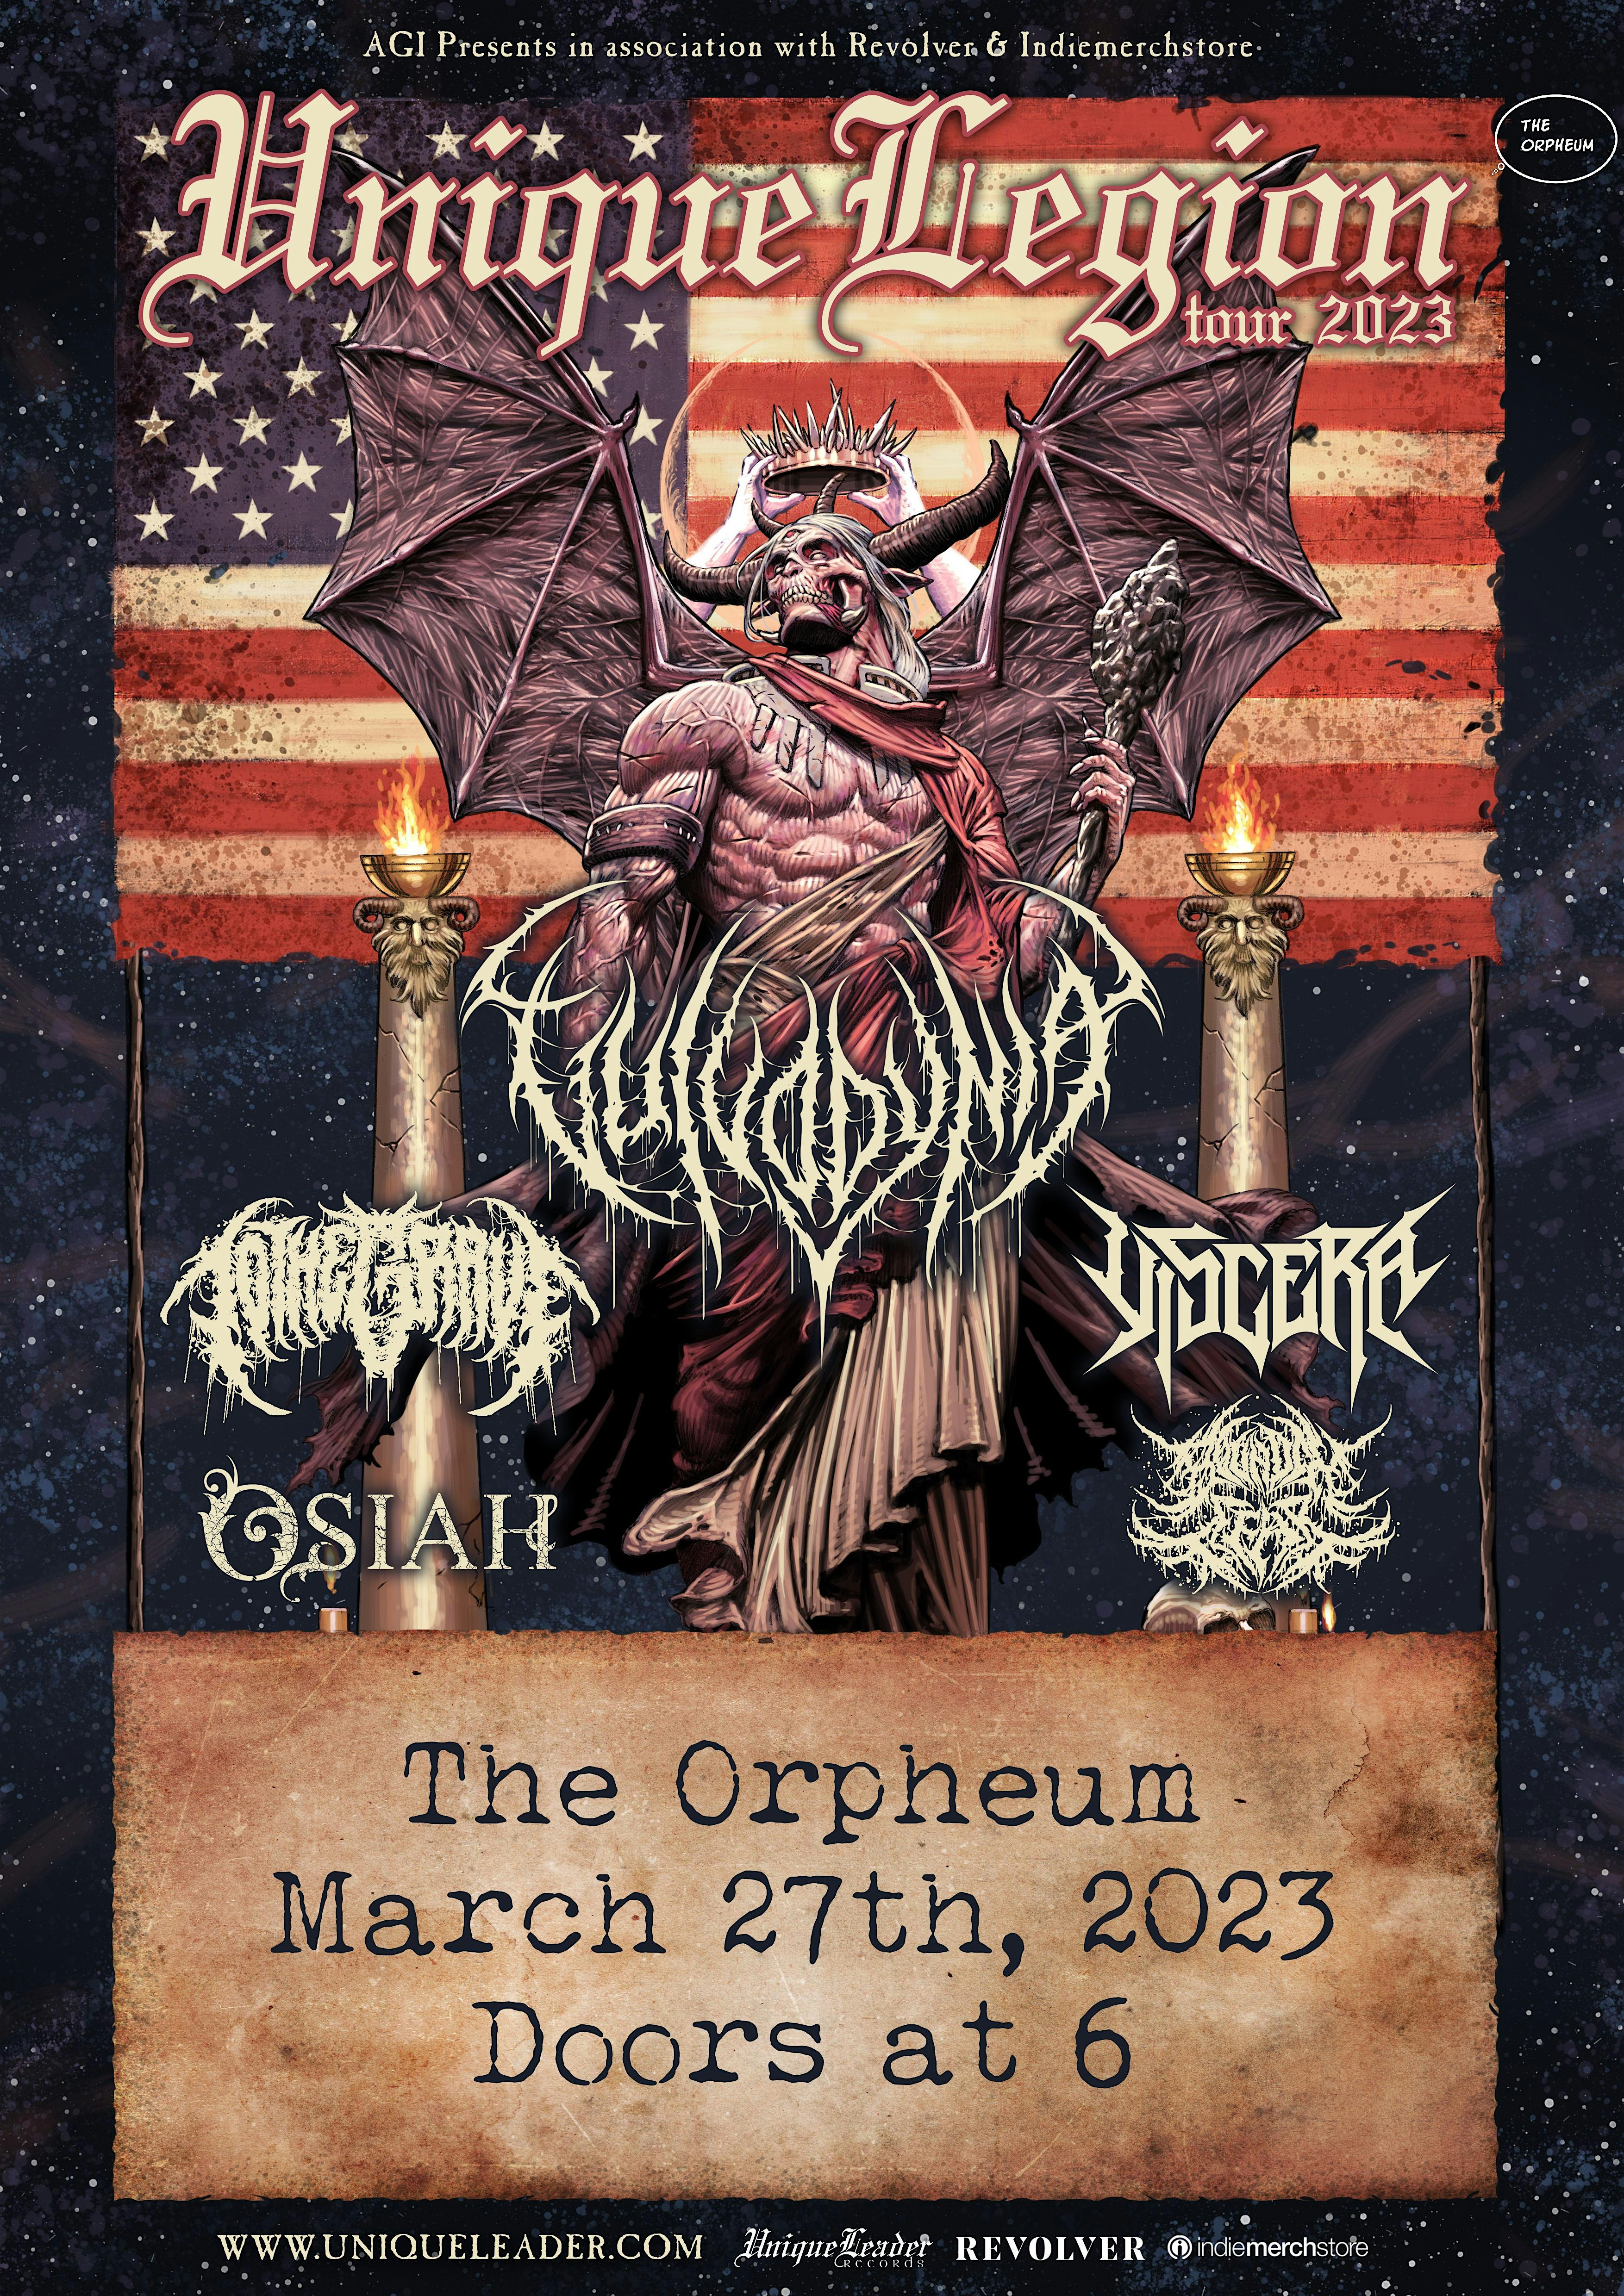 Vulvodynia, To The Grave, Viscera, Osiah, and Bound in Fear in Tampa at the Orpheum